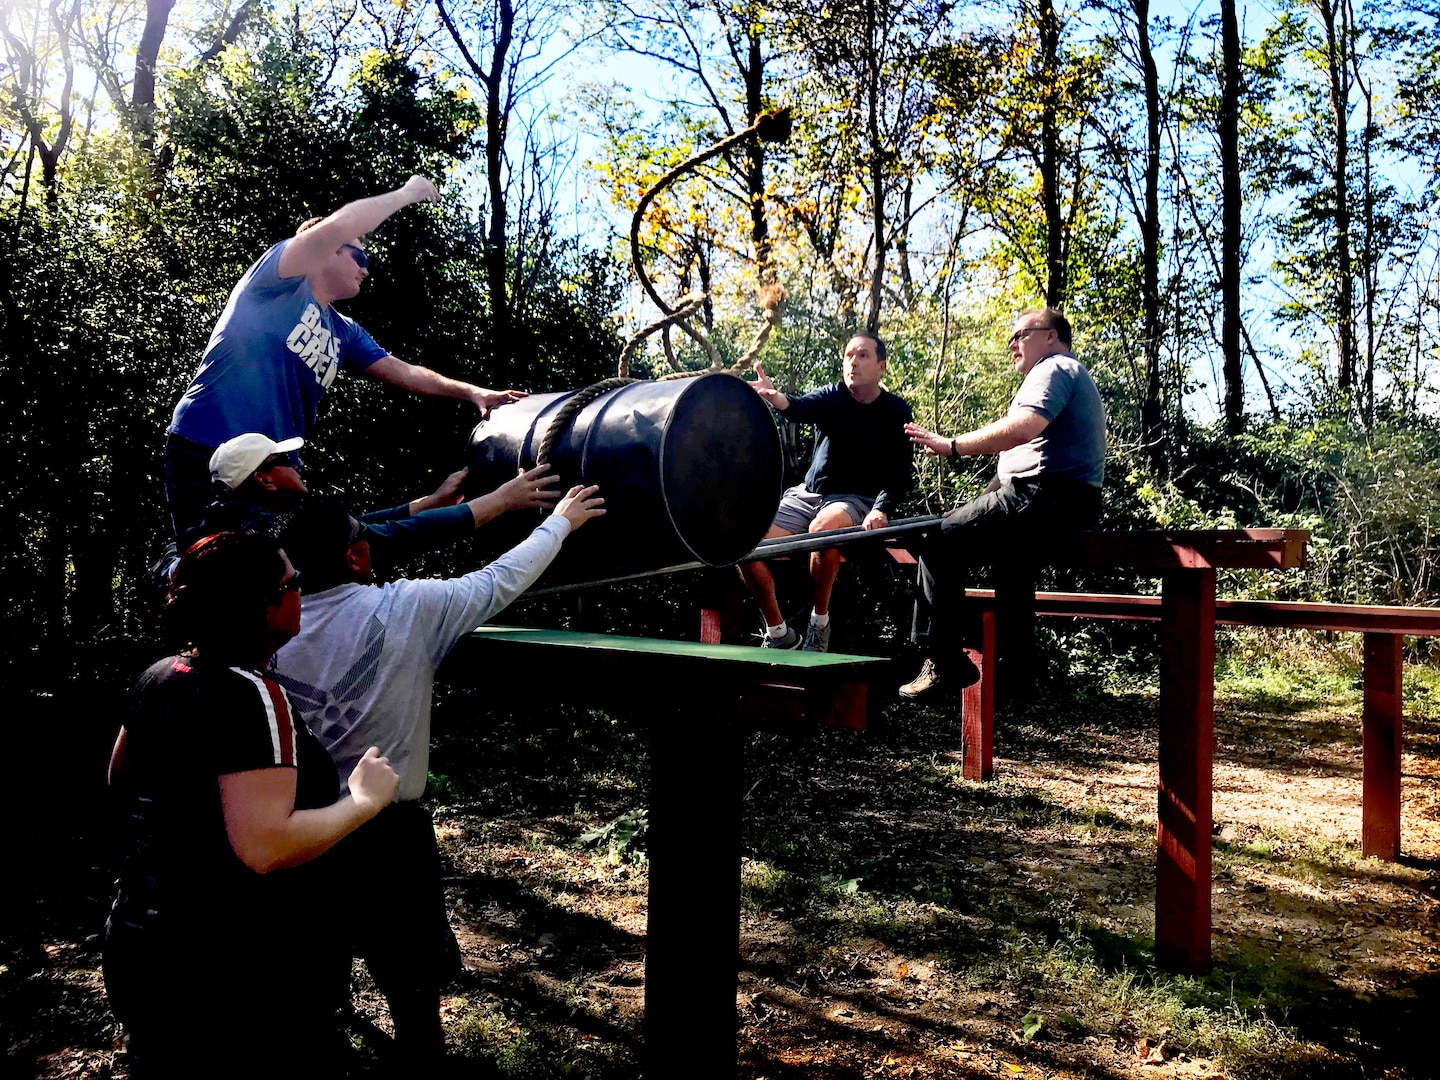 Members of DLA’s rapid deployment Red Team go through team-building exercises to foster trust and communication skills on an obstacle course during mobilization training at Camp Atterbury, Indiana.